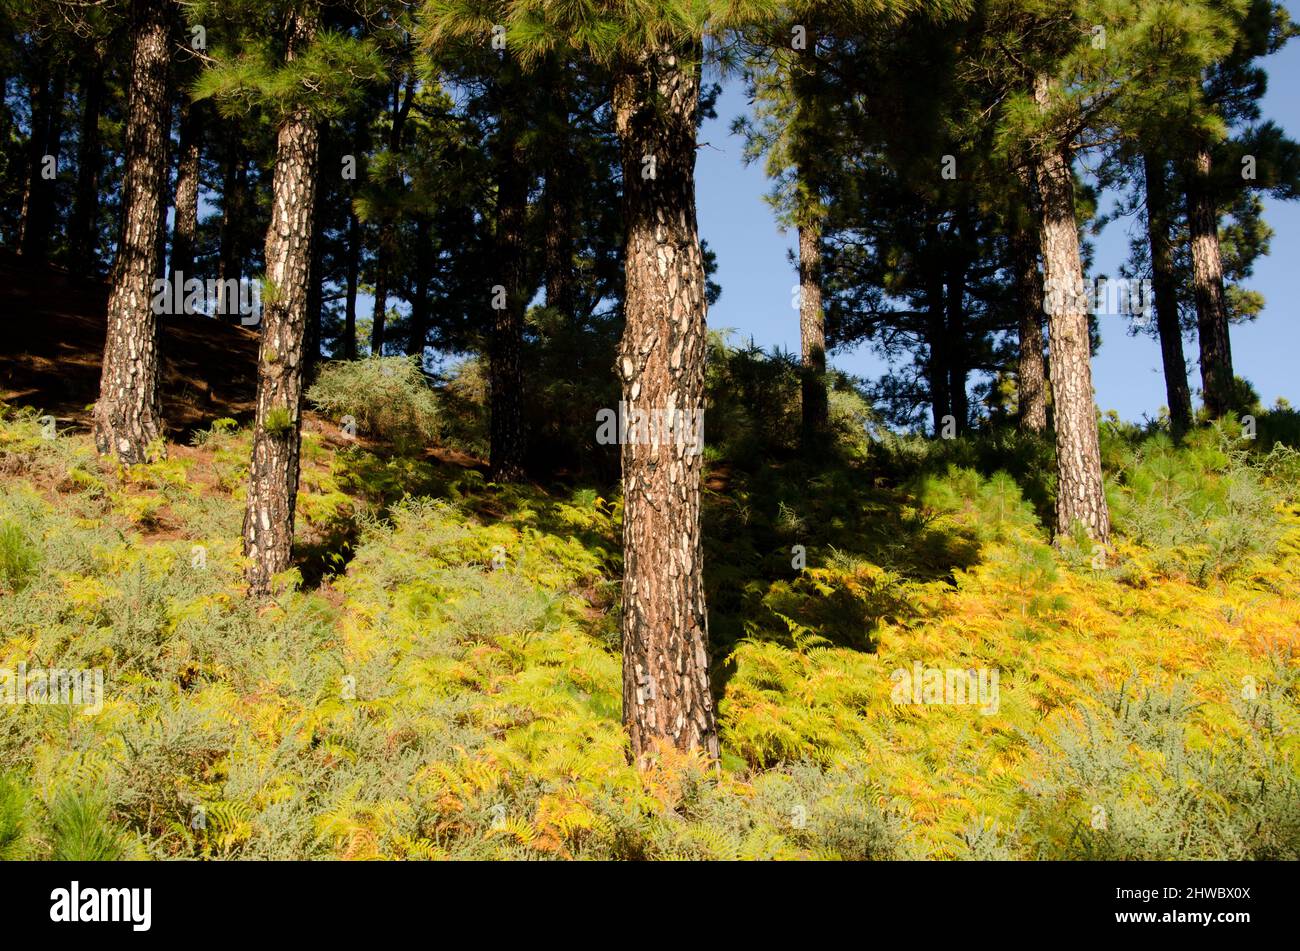 Forest of Canary Island pine Pinus canariensis and undergrowth of bracken ferns and Canary Island flatpod. La Palma. Canary Islands. Spain. Stock Photo